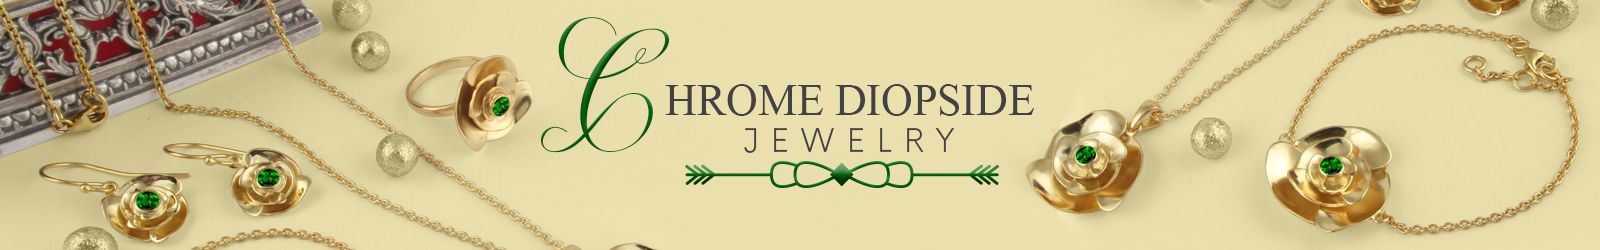 Silver Chrome Diopside Jewelry Wholesale Supplier